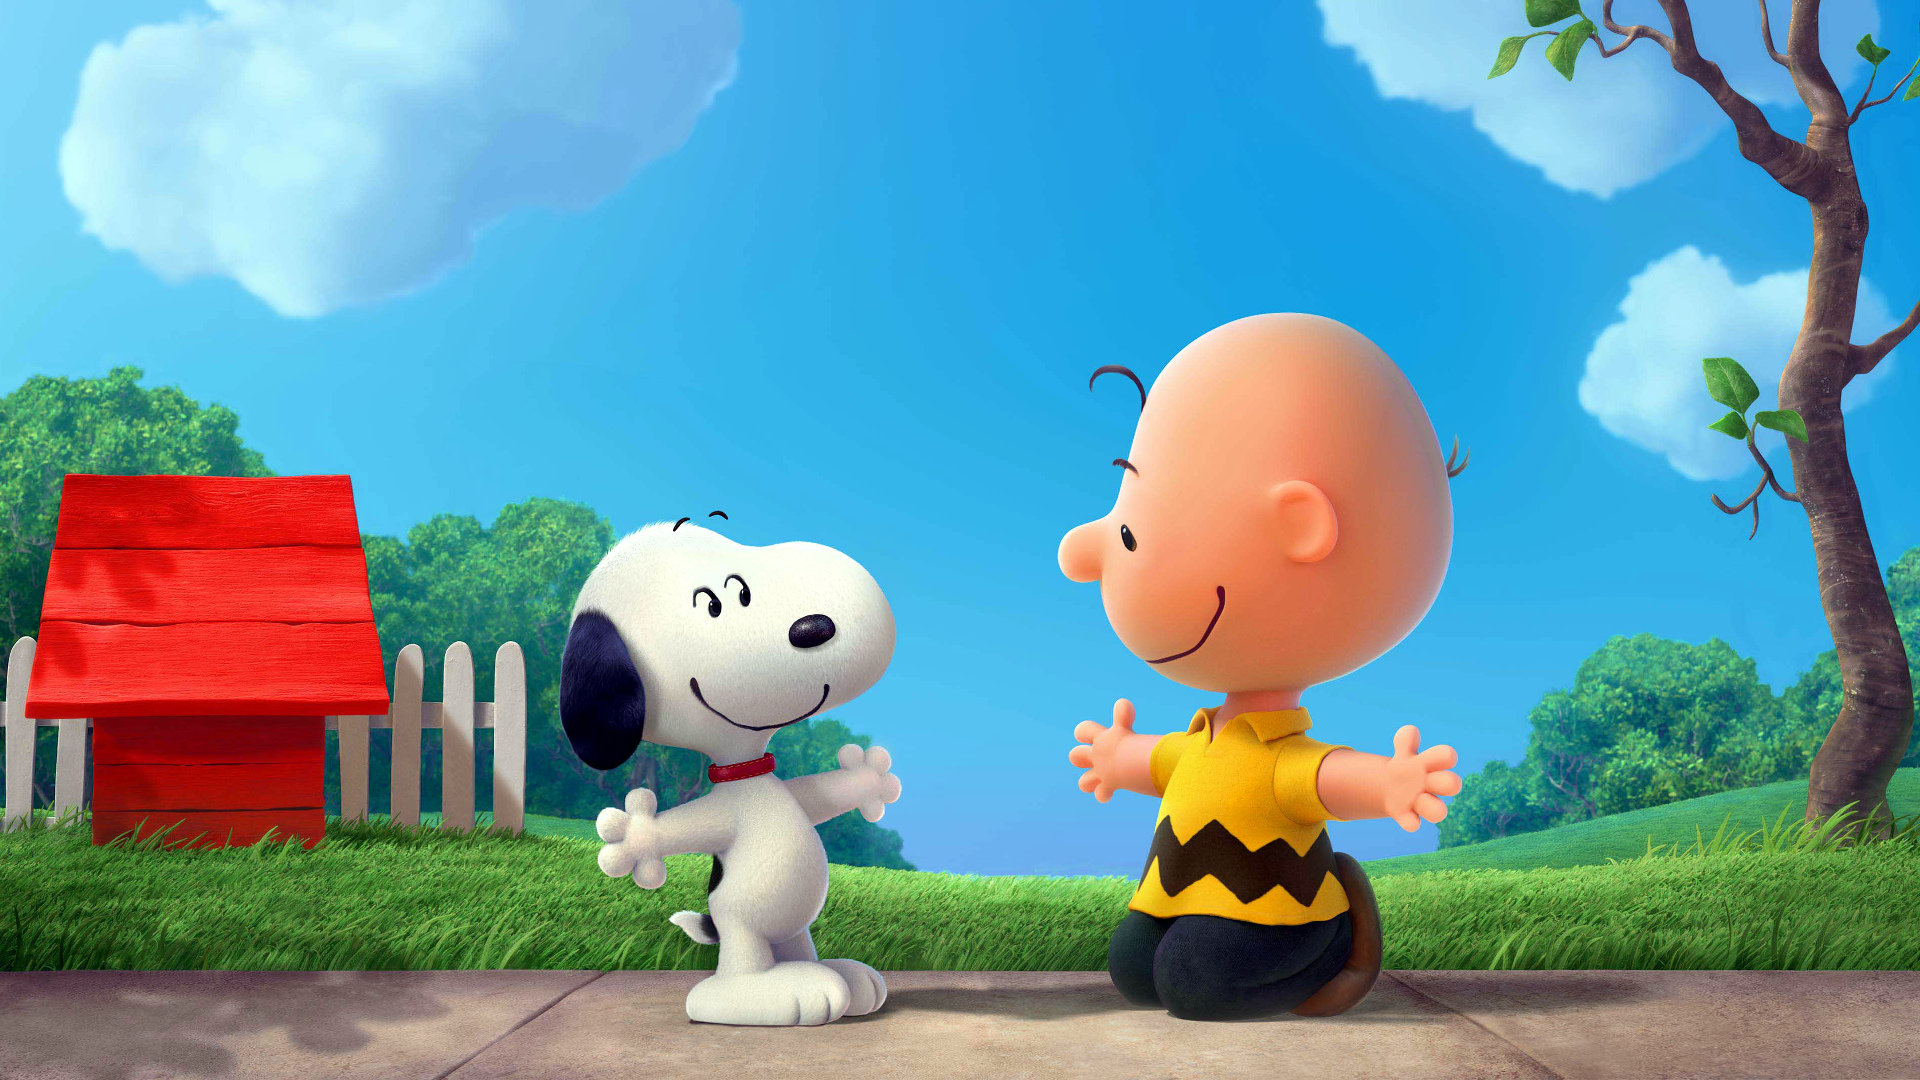 Download full hd 1920x1080 Peanuts PC background ID:62089 for free